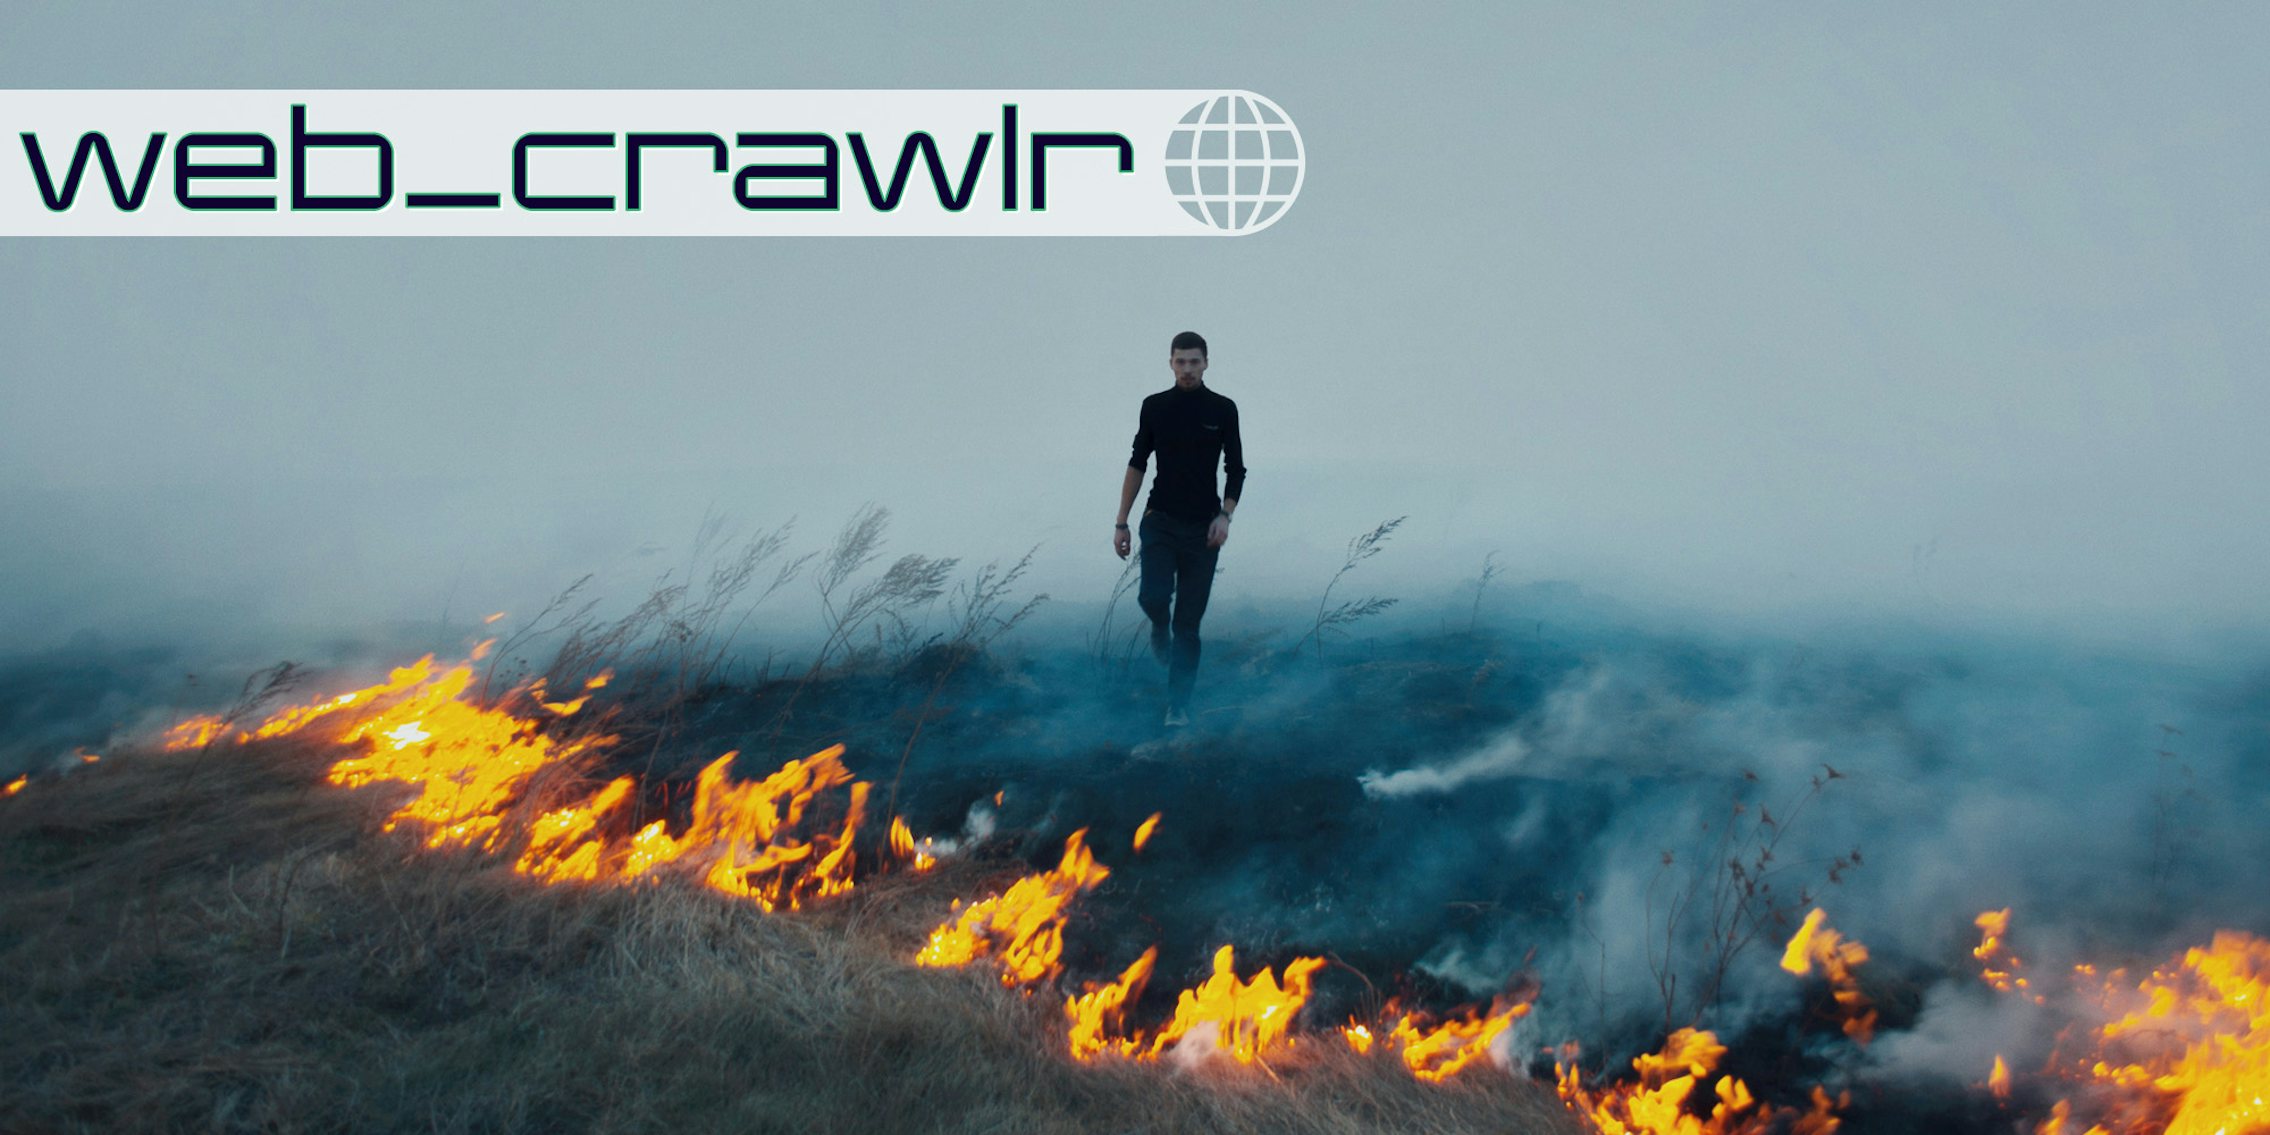 A man walking through a field with burning crops. The Daily Dot web_crawlr newsletter logo is in the top left corner.